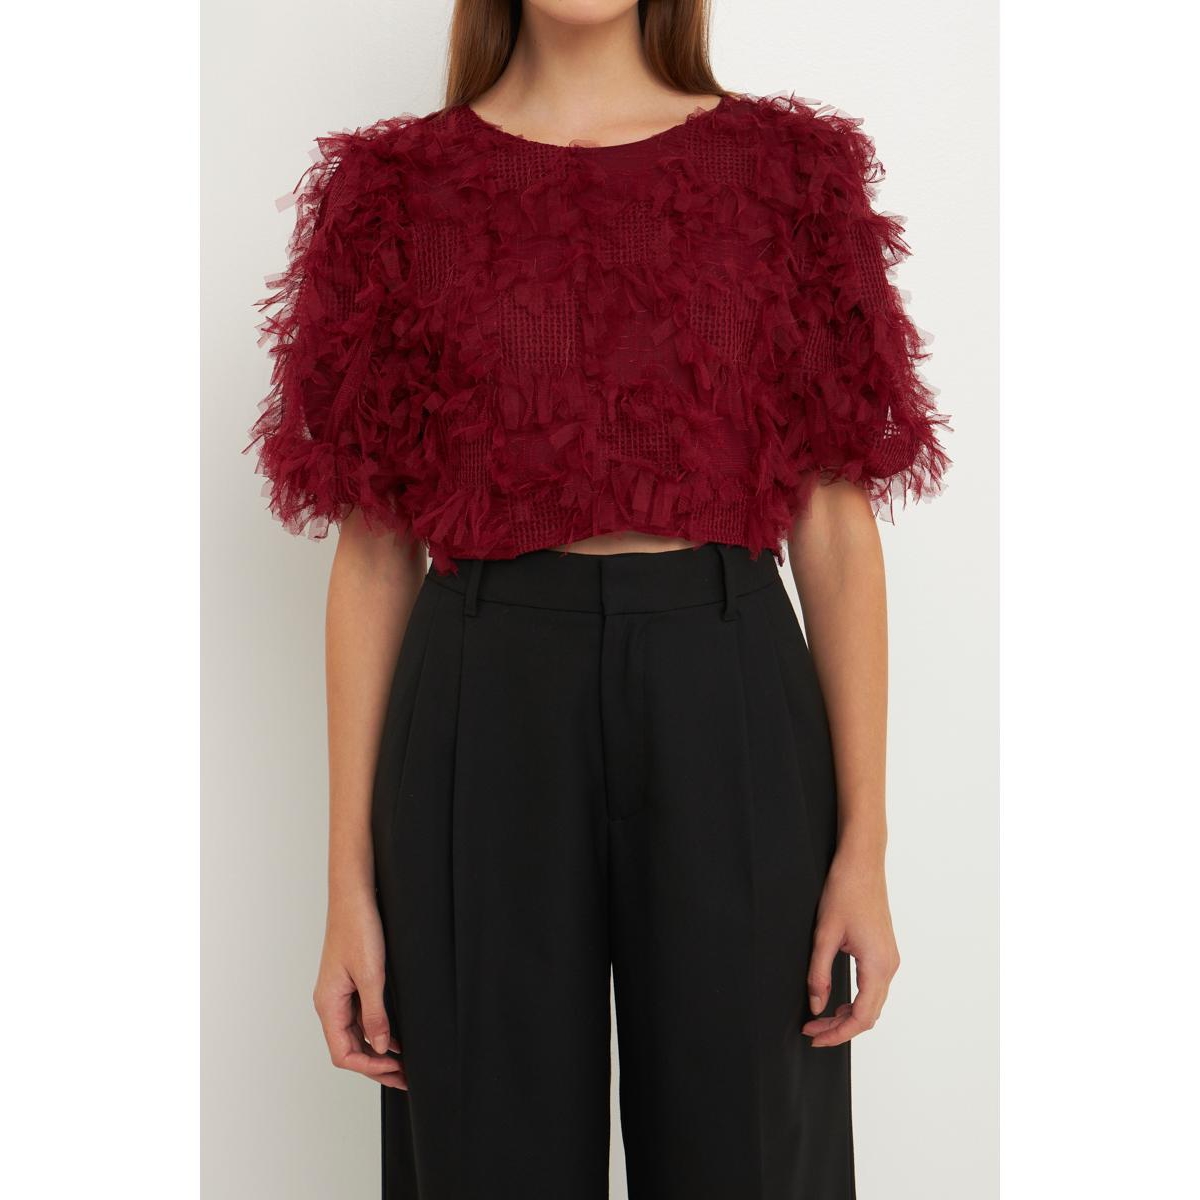 ENDLESS ROSE WOMEN'S GRIDDED MESH FEATHERED CROPPED TOP